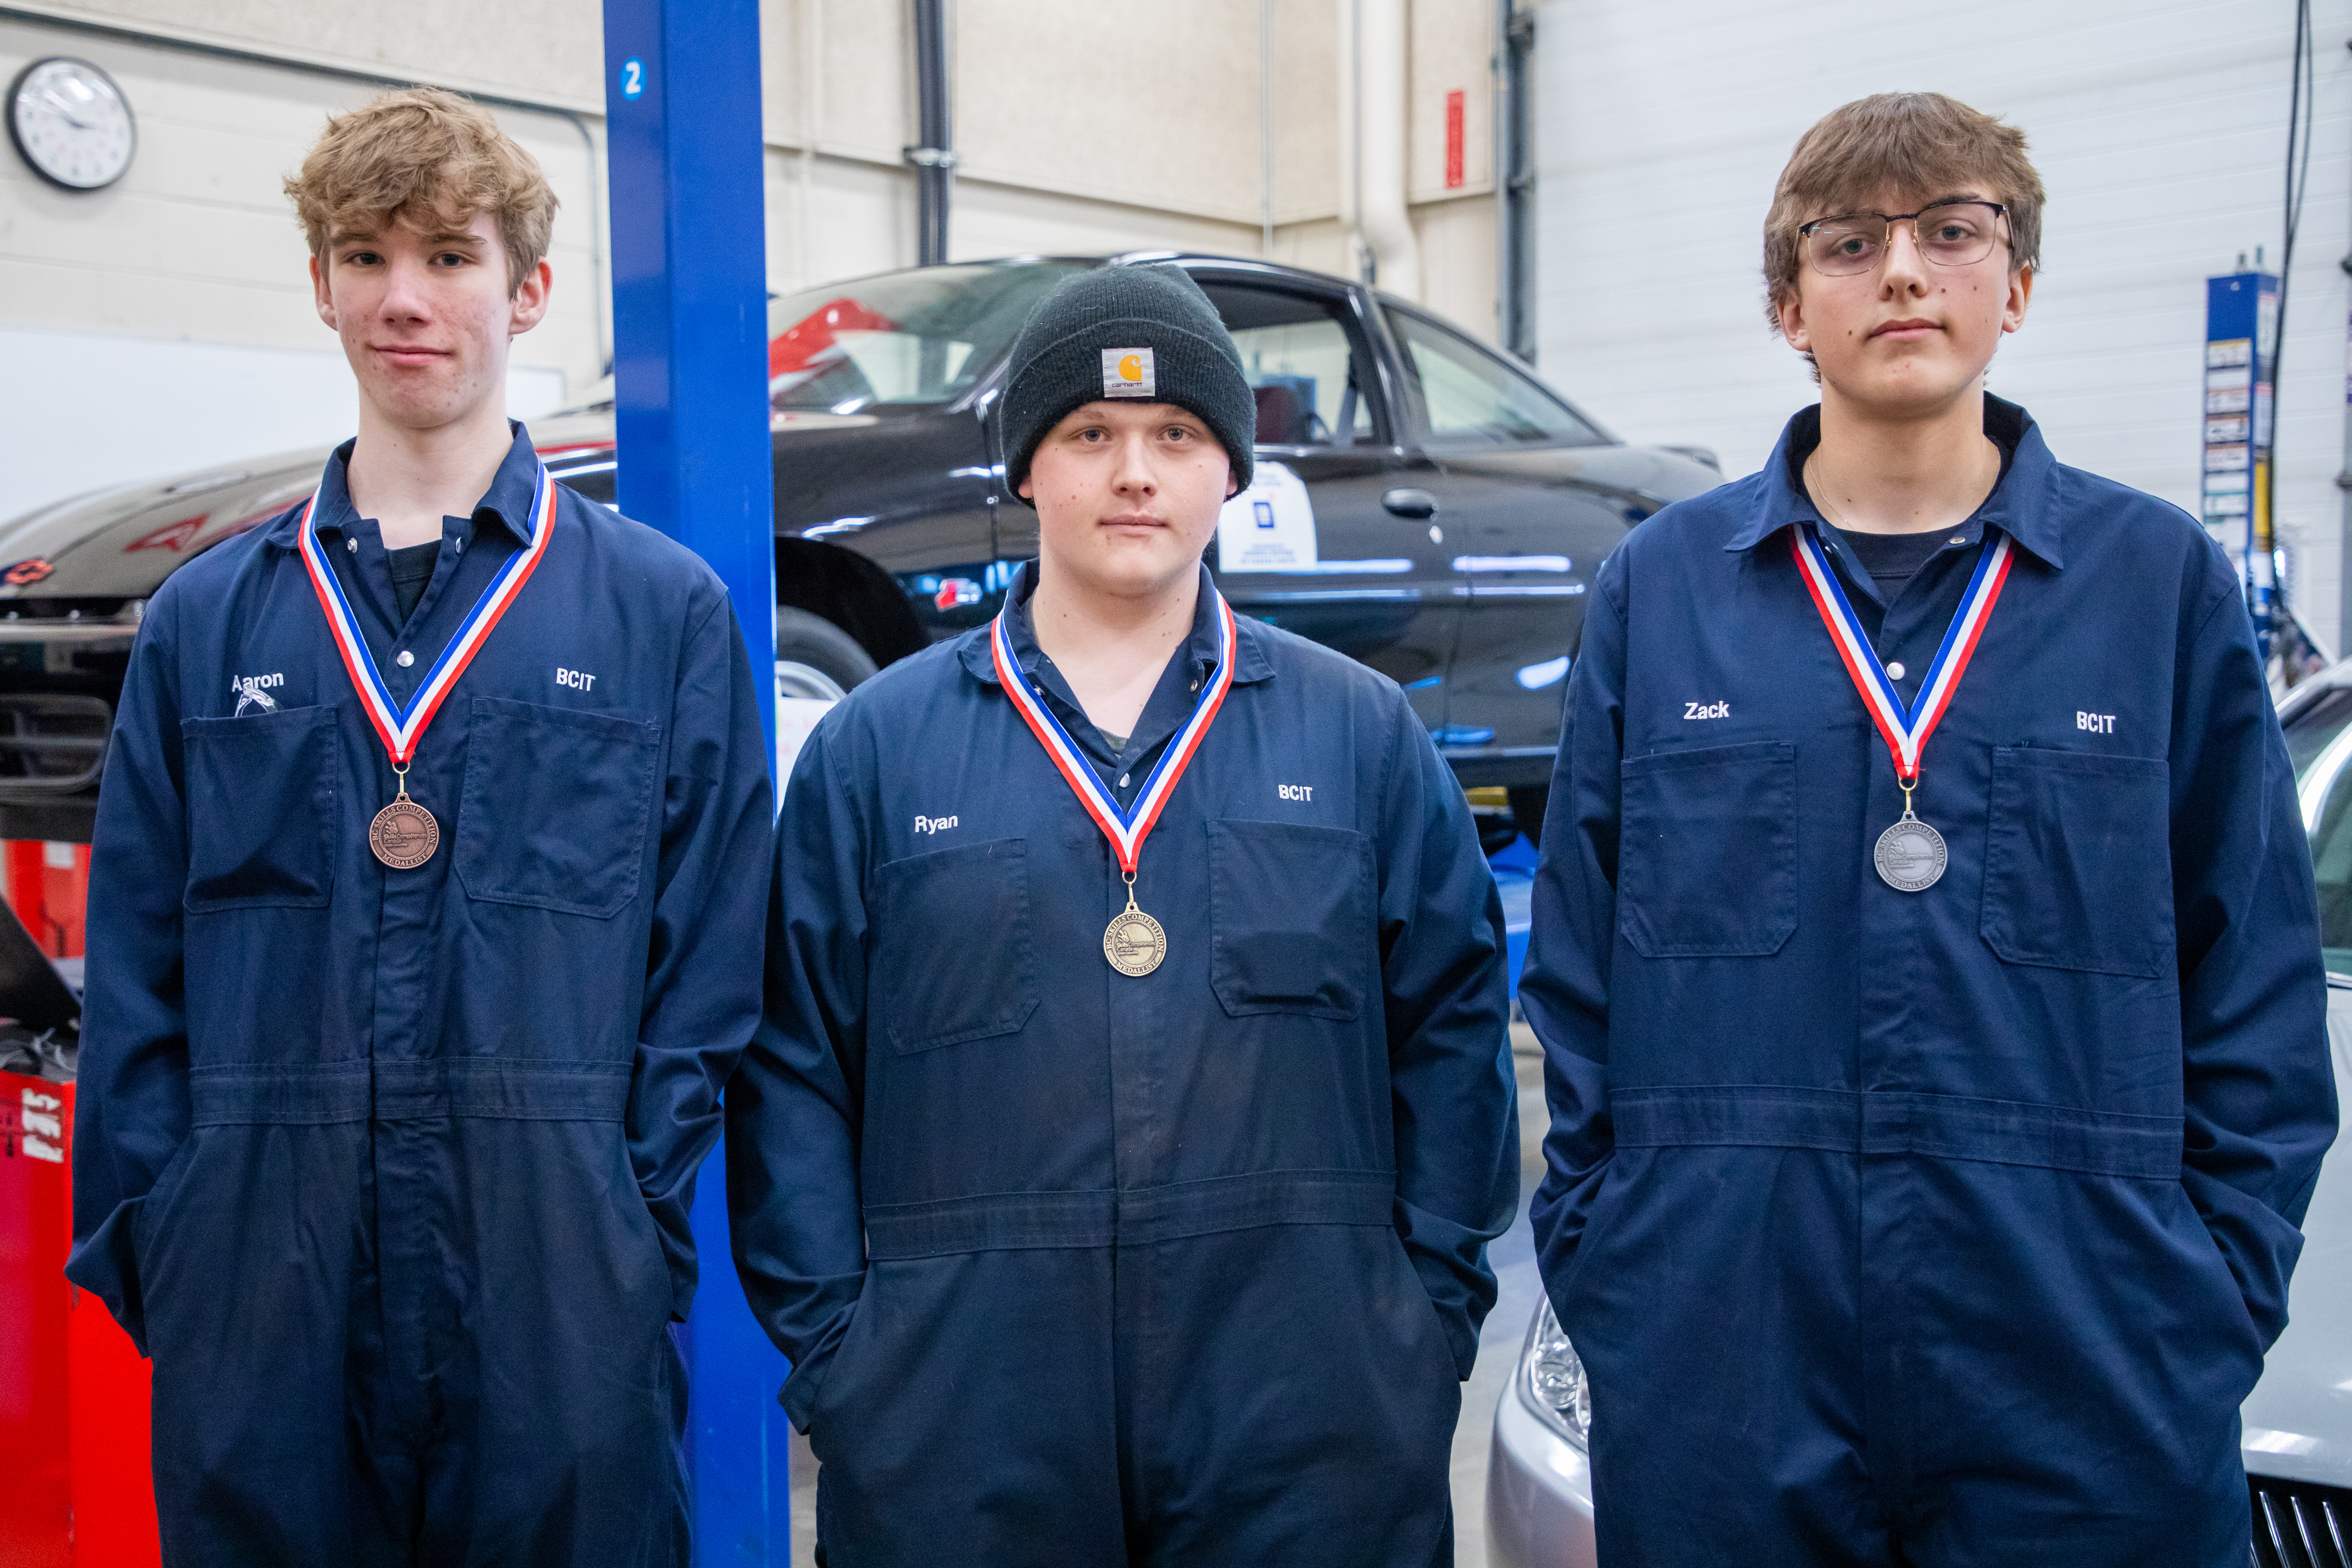 Winners of the auto service Skills Canada BC regional competition pose with their medals.